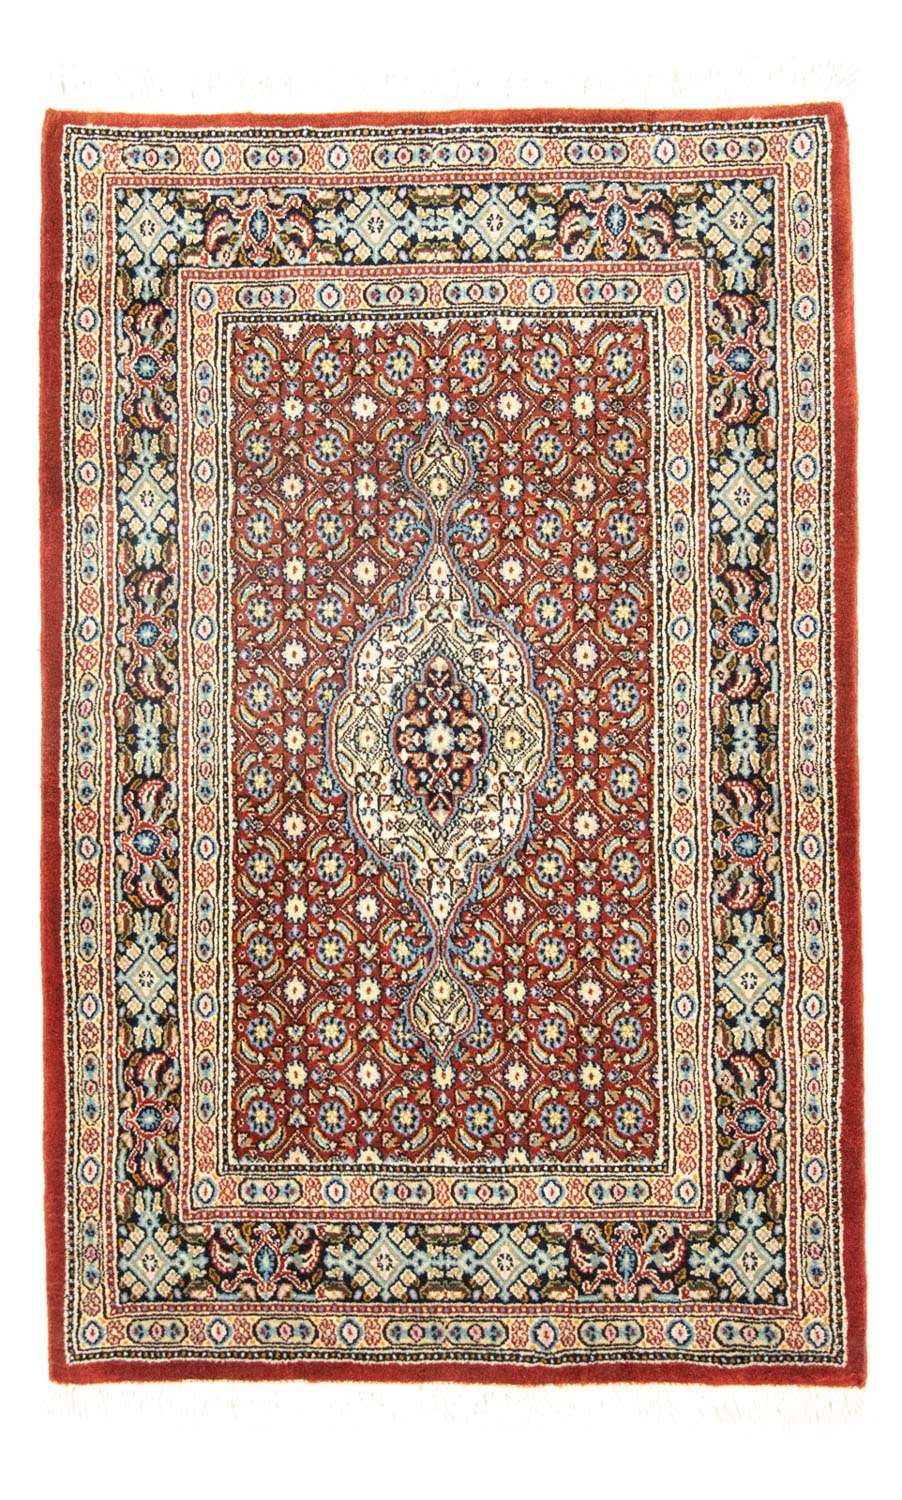 Perser Rug - Classic - 130 x 80 cm - red